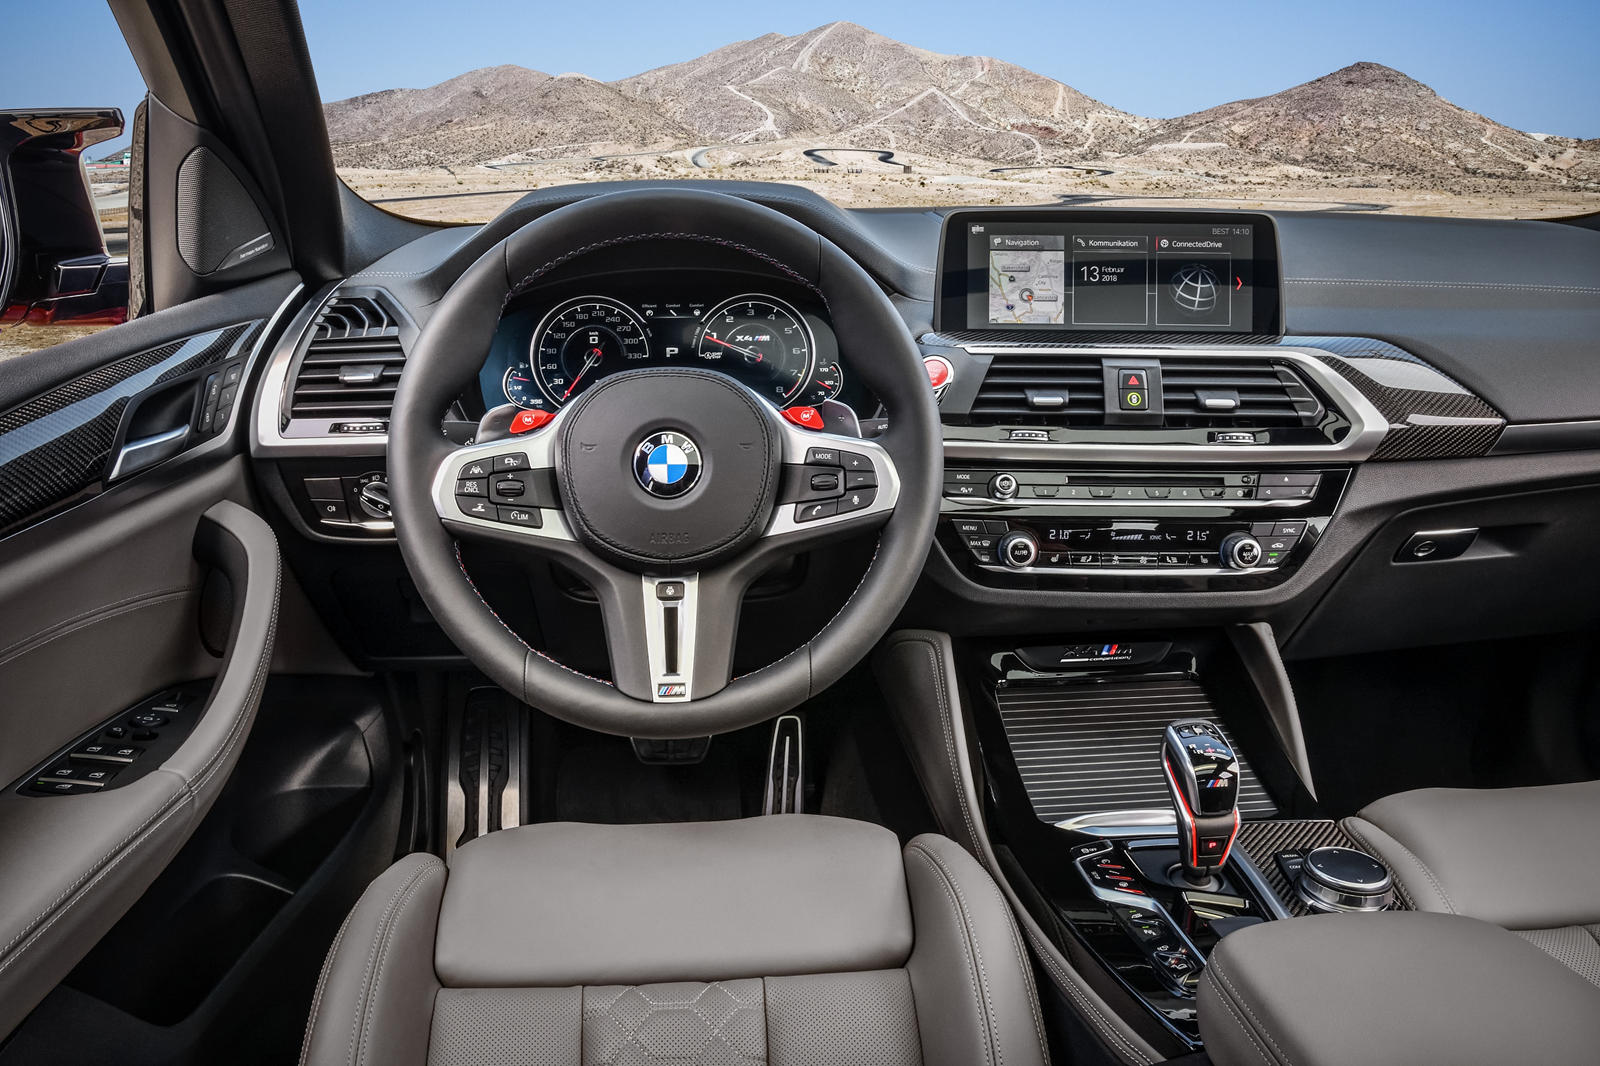 2021 BMW X4 M: Review, Trims, Specs, Price, New Interior Features